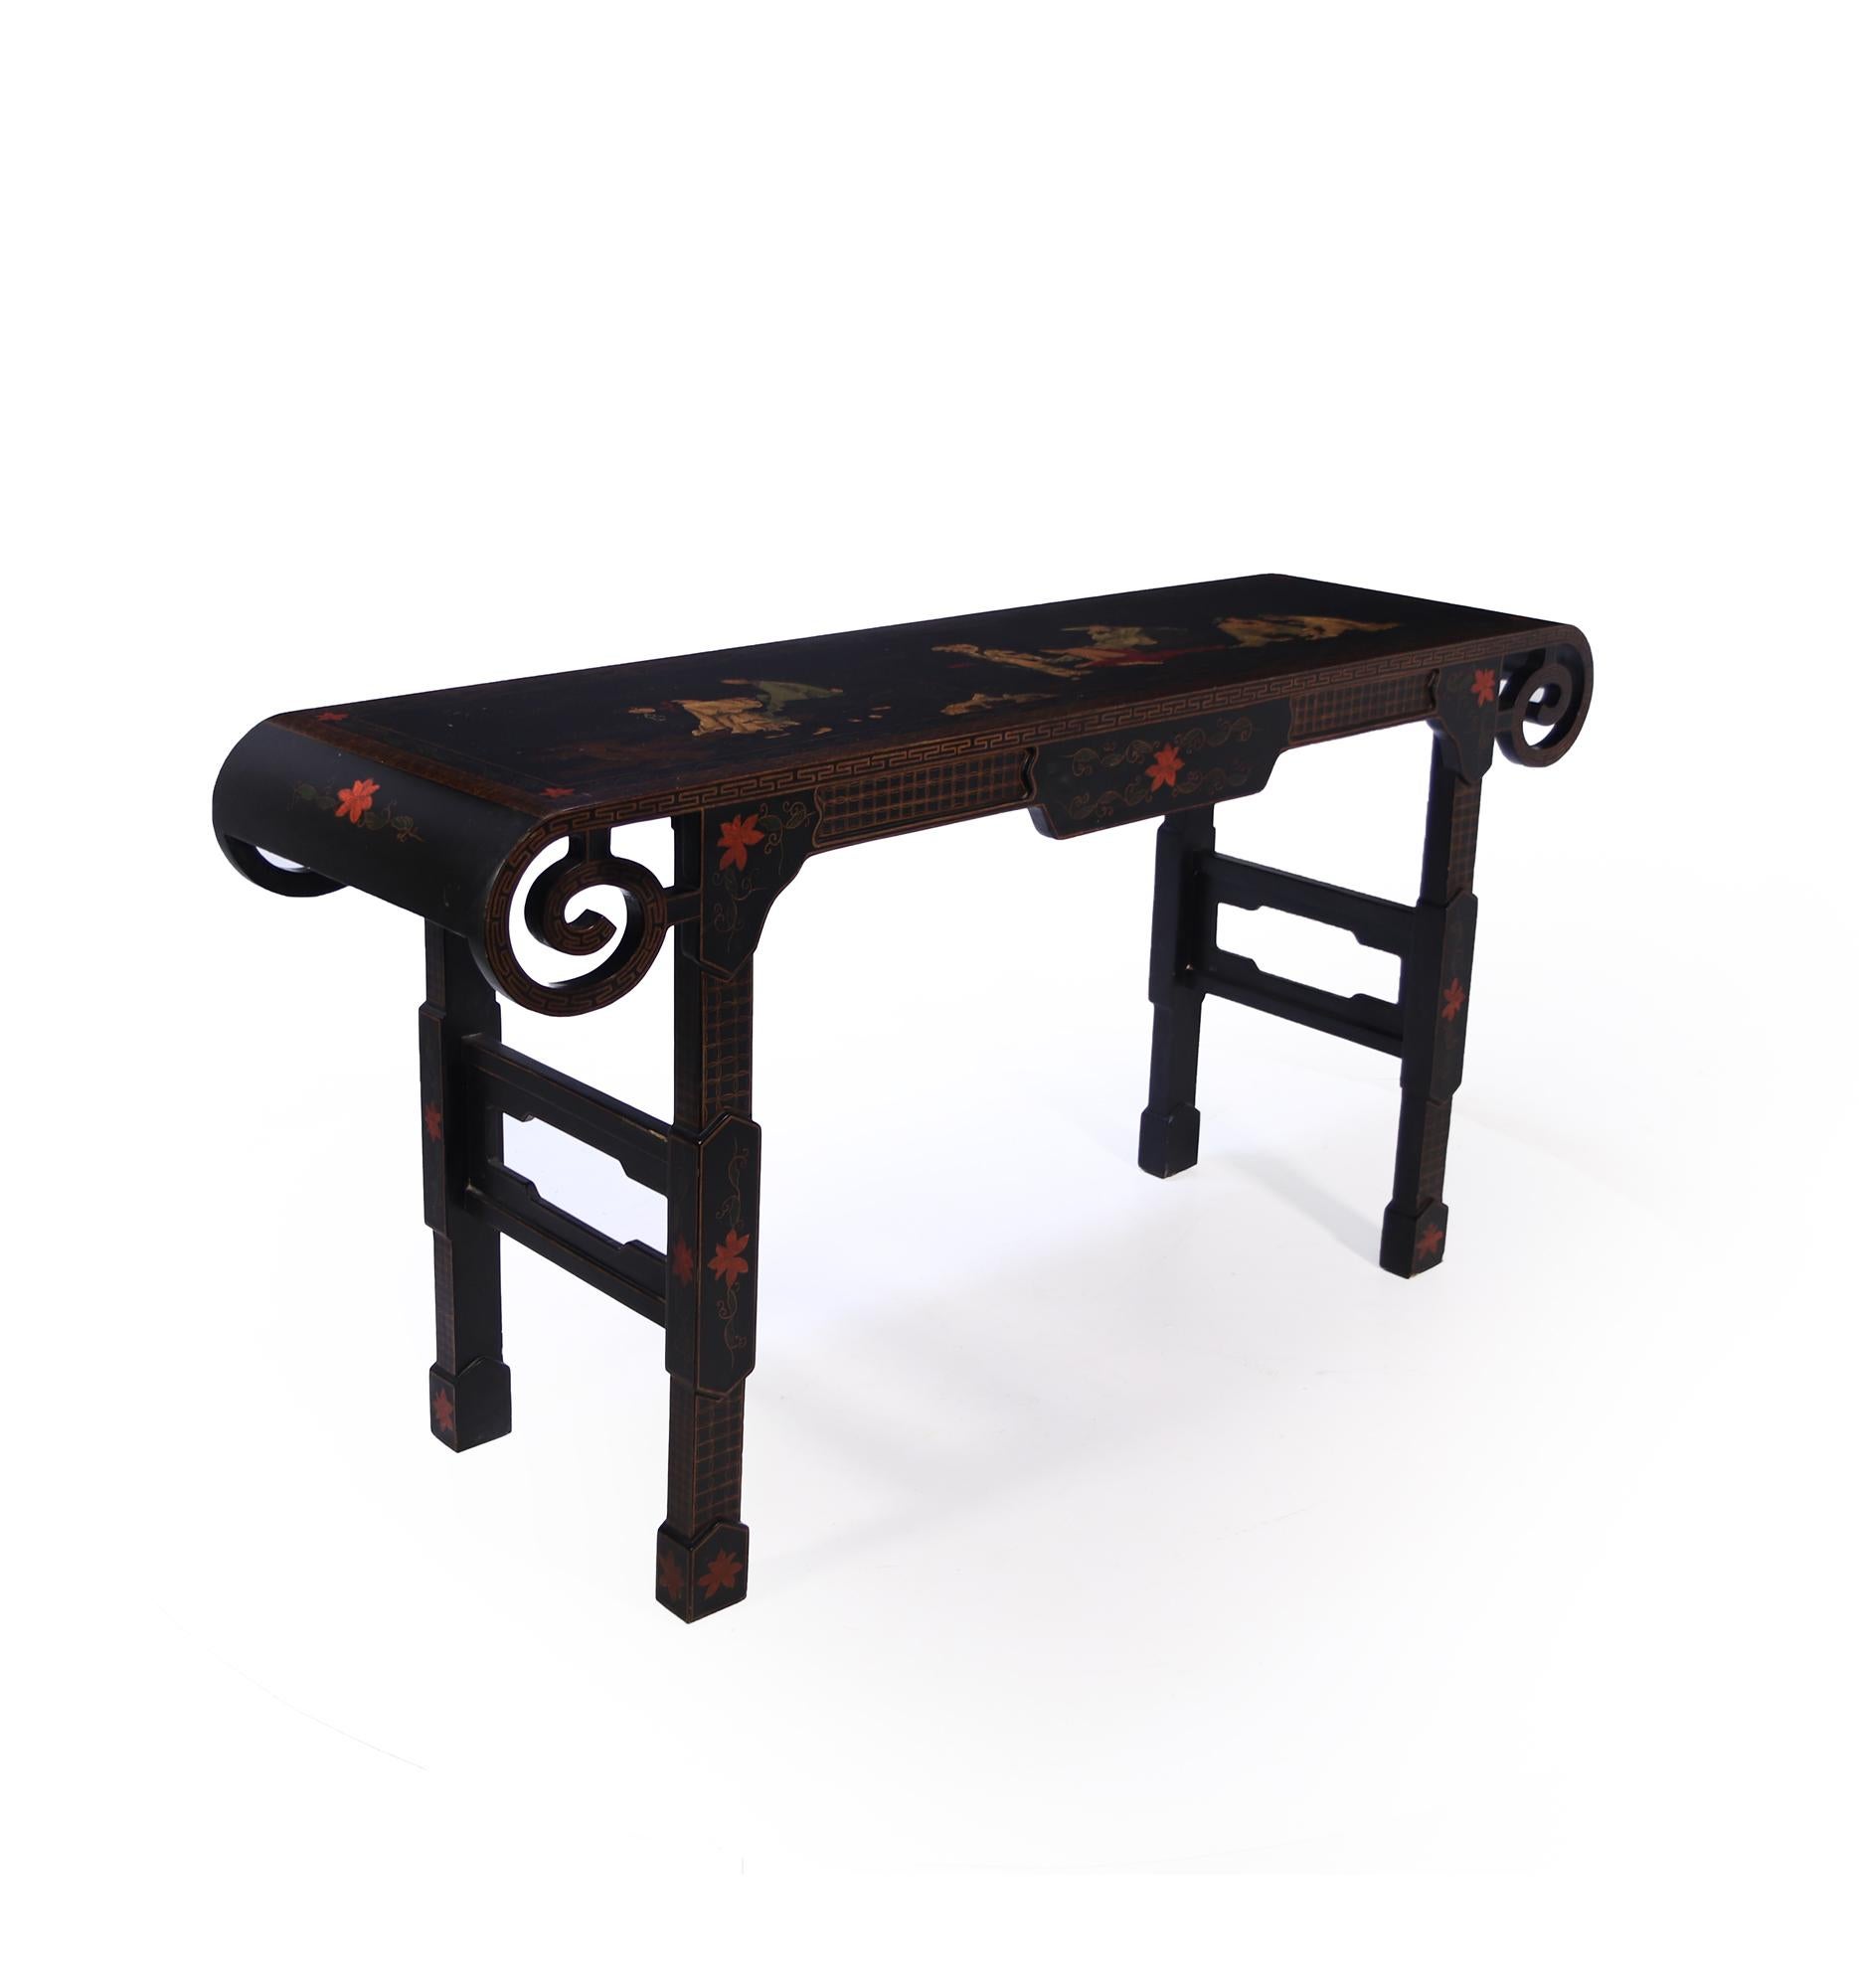 A Chinese console scrolls table mid 20th century, in good vintage condition great quality paintings on the top

Age: 1960

Style: Chinese

Material: Lacquered wood

Origin : China

Condition: Very good

Restoration; cleaned and